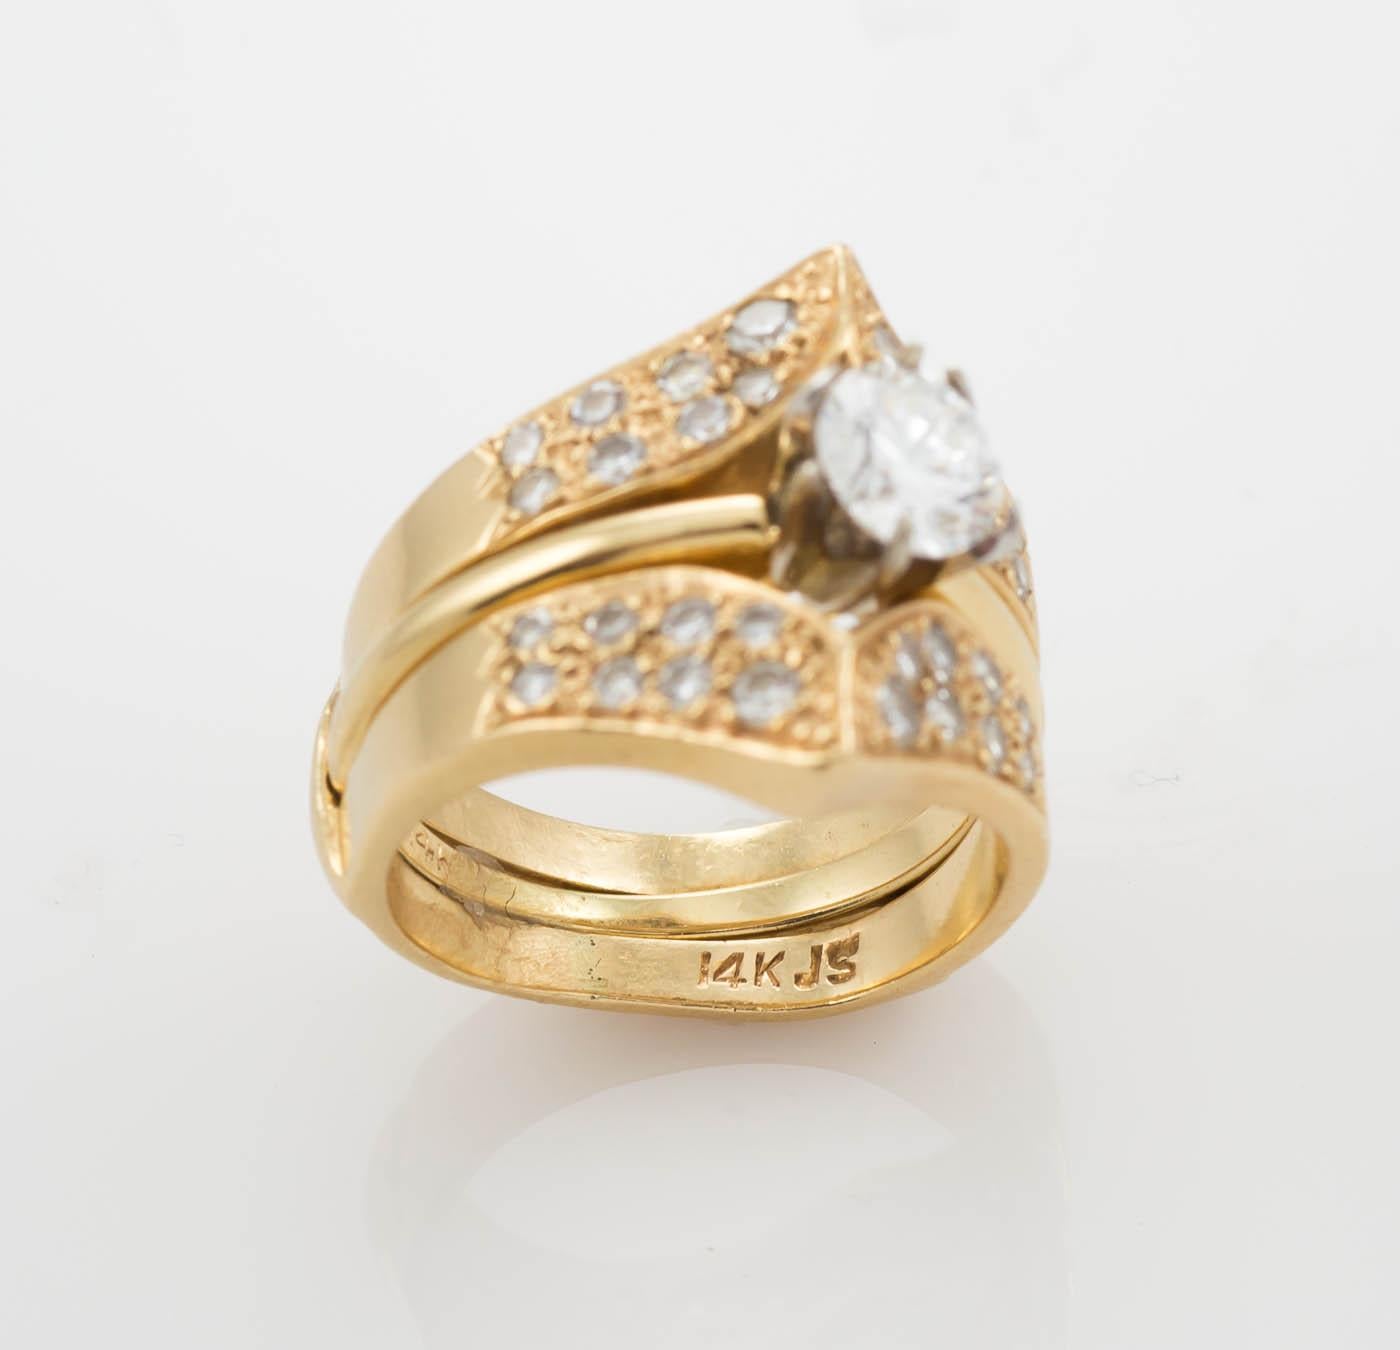 Ladies Diamond Solitaire Ring In 14k Yellow Gold.
Stamped 14k And Weighs 2 Grams.
The Diamond Is A Round Brilliant Cut, .58 Carat, F Color, Vs1 Clarity,Very Good Cut, GIA Report#: 1176461707.
The Diamond Is Set In A Tiffany Style Setting.
The Ring